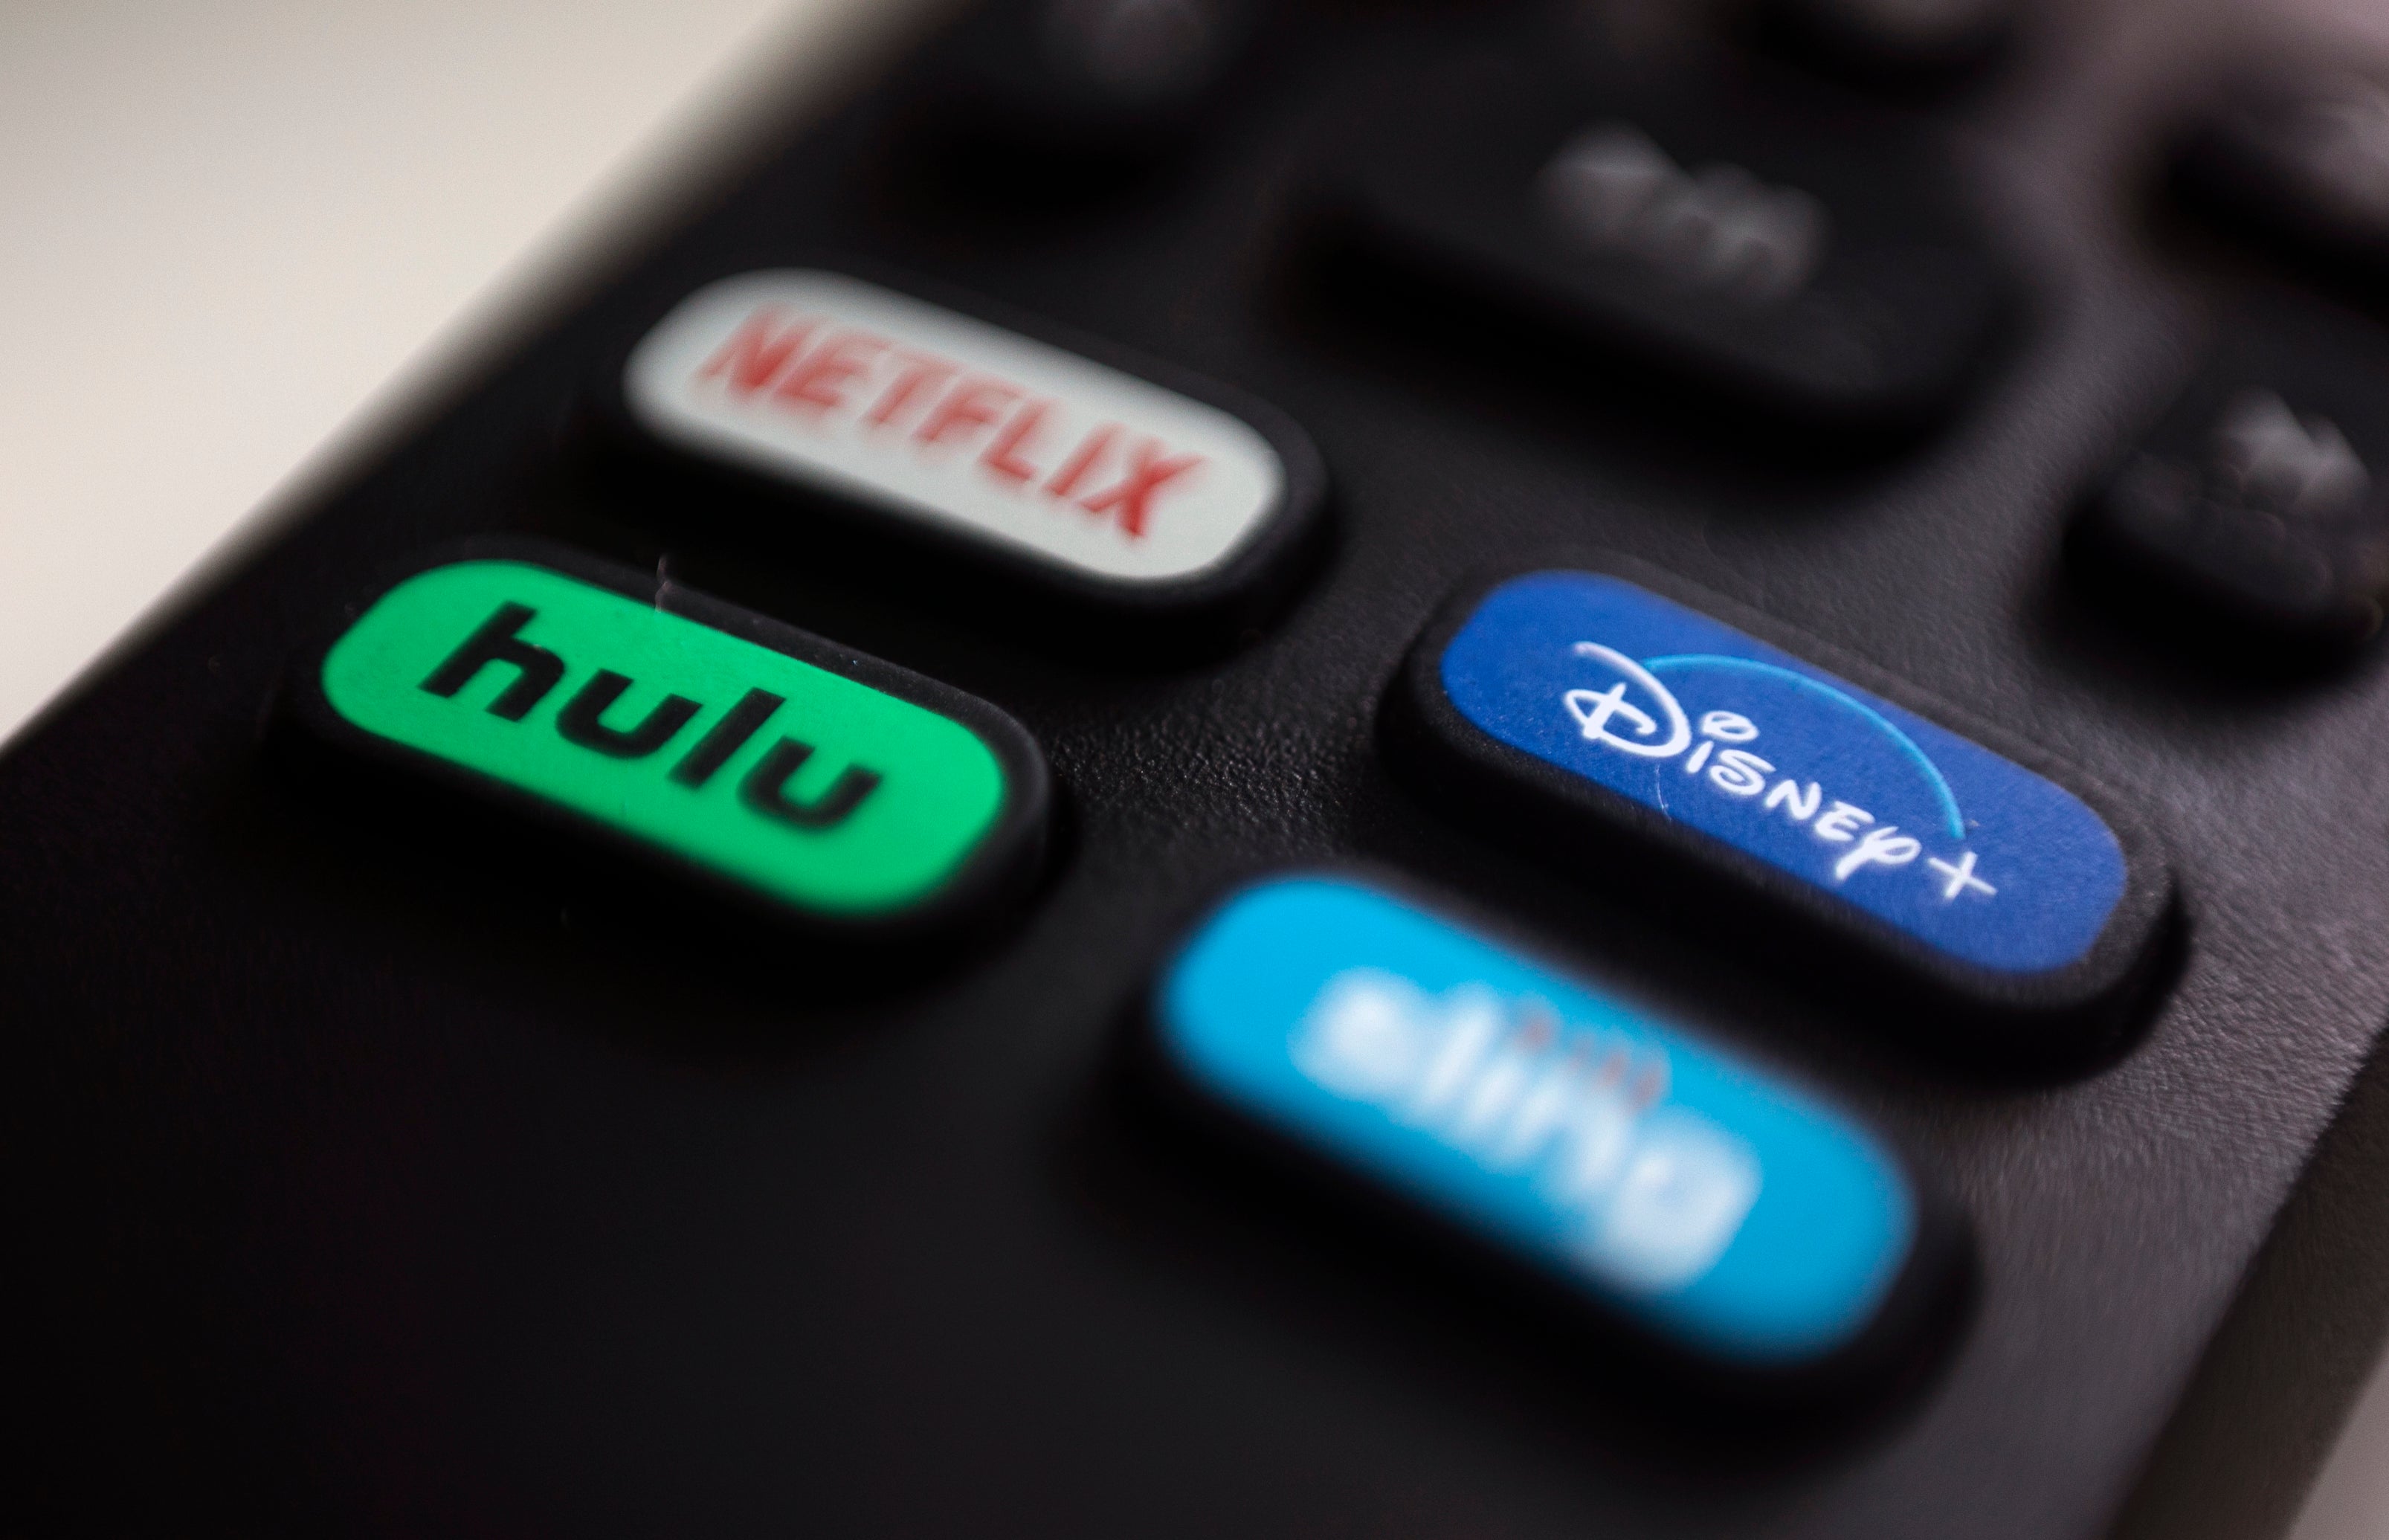 Nearly three-quarters of those surveyed about streaming habits said they would prefer a single content hub to bundle together all of their subscriptions